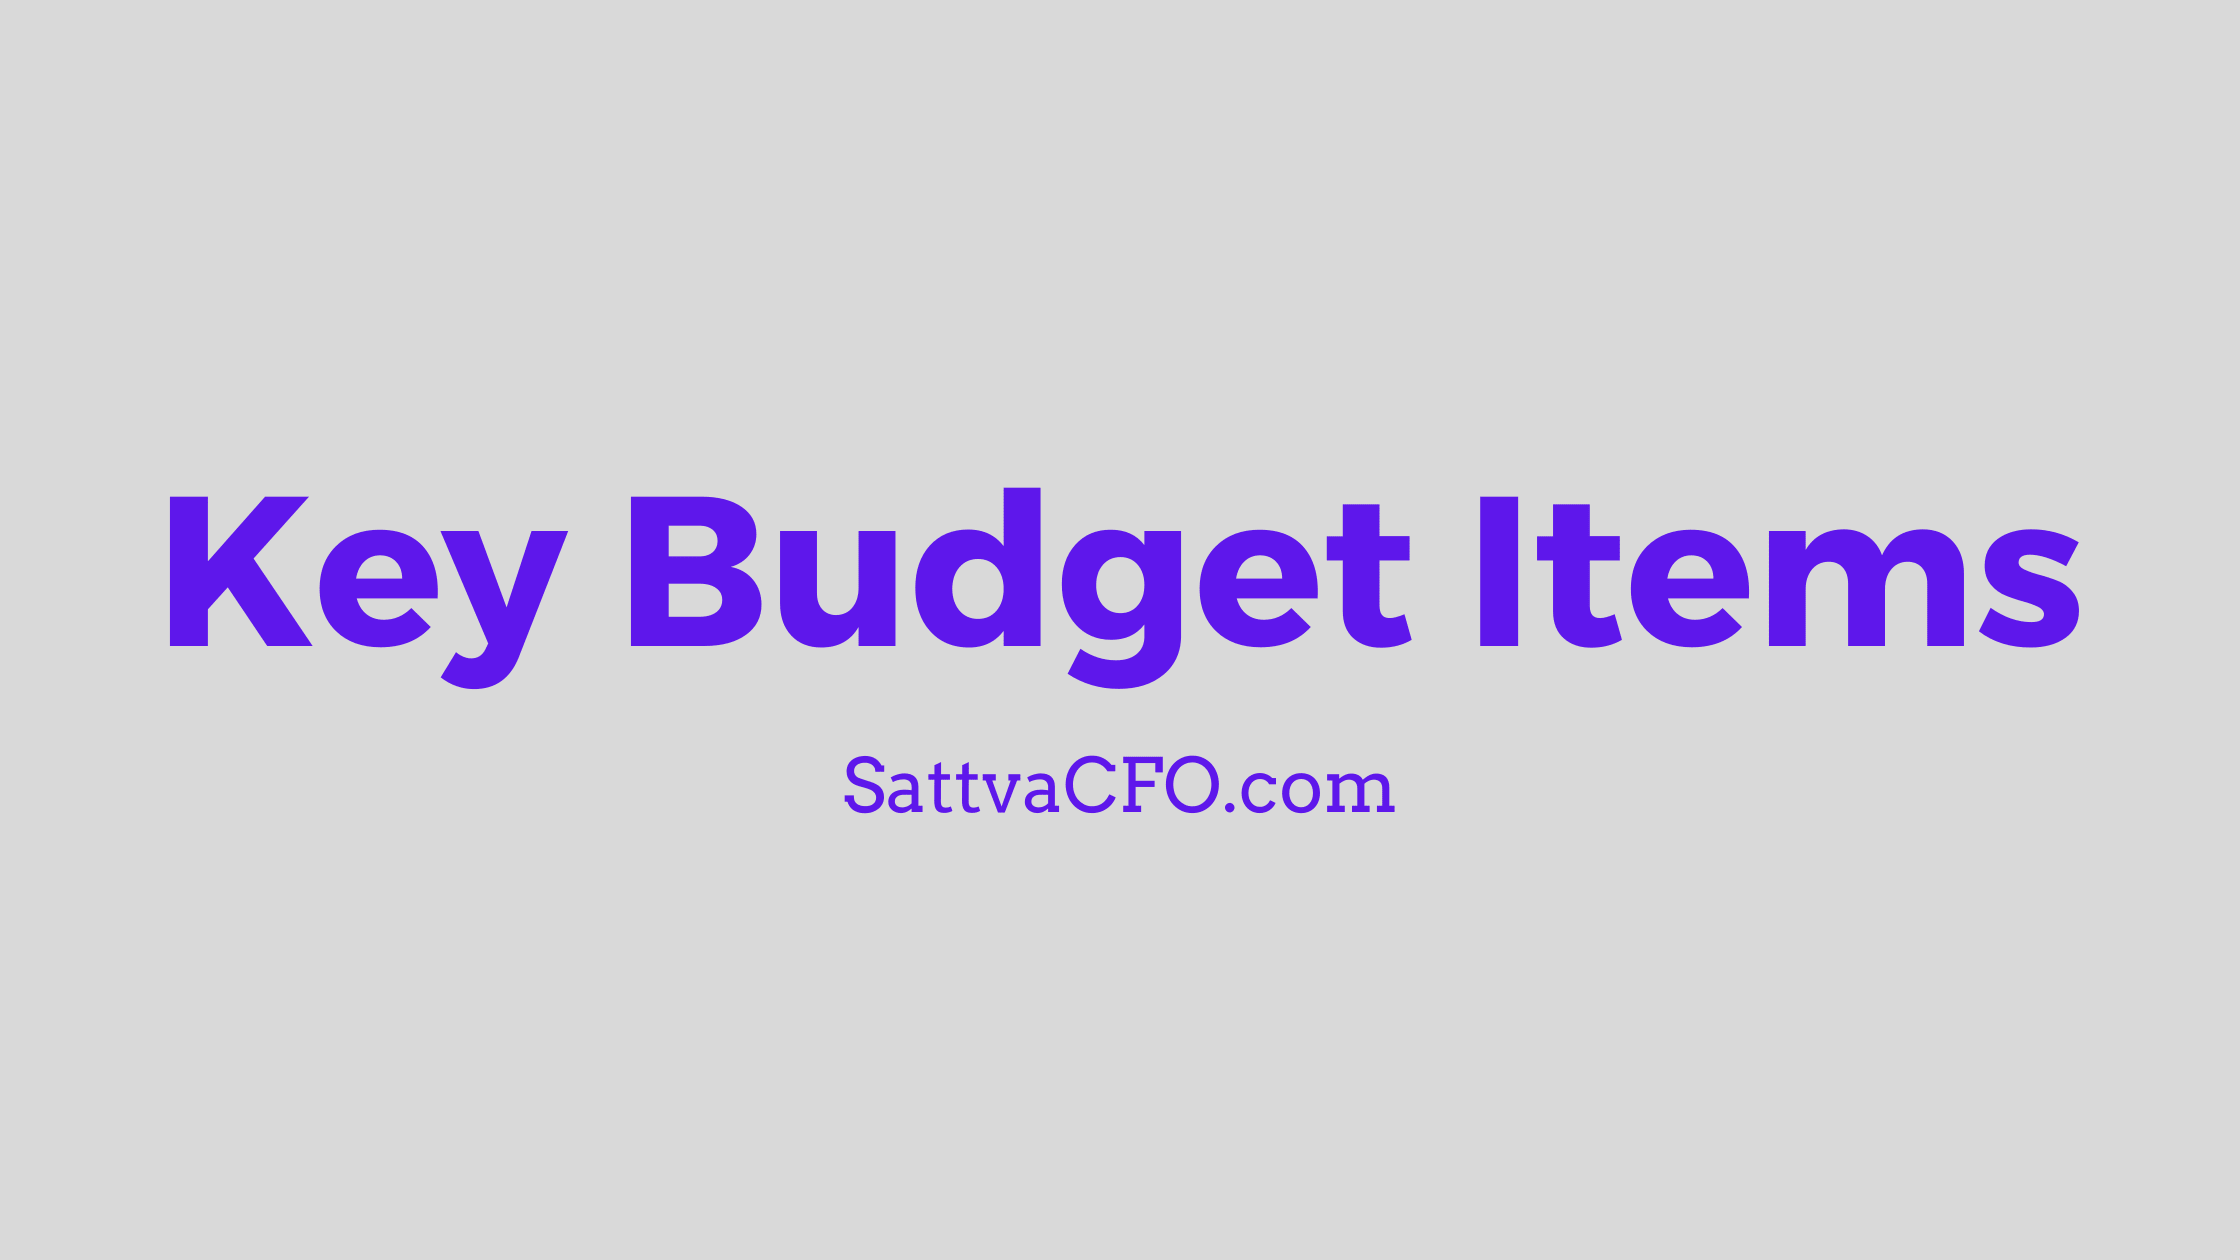 5 key items every budget should have | SattvaCFO